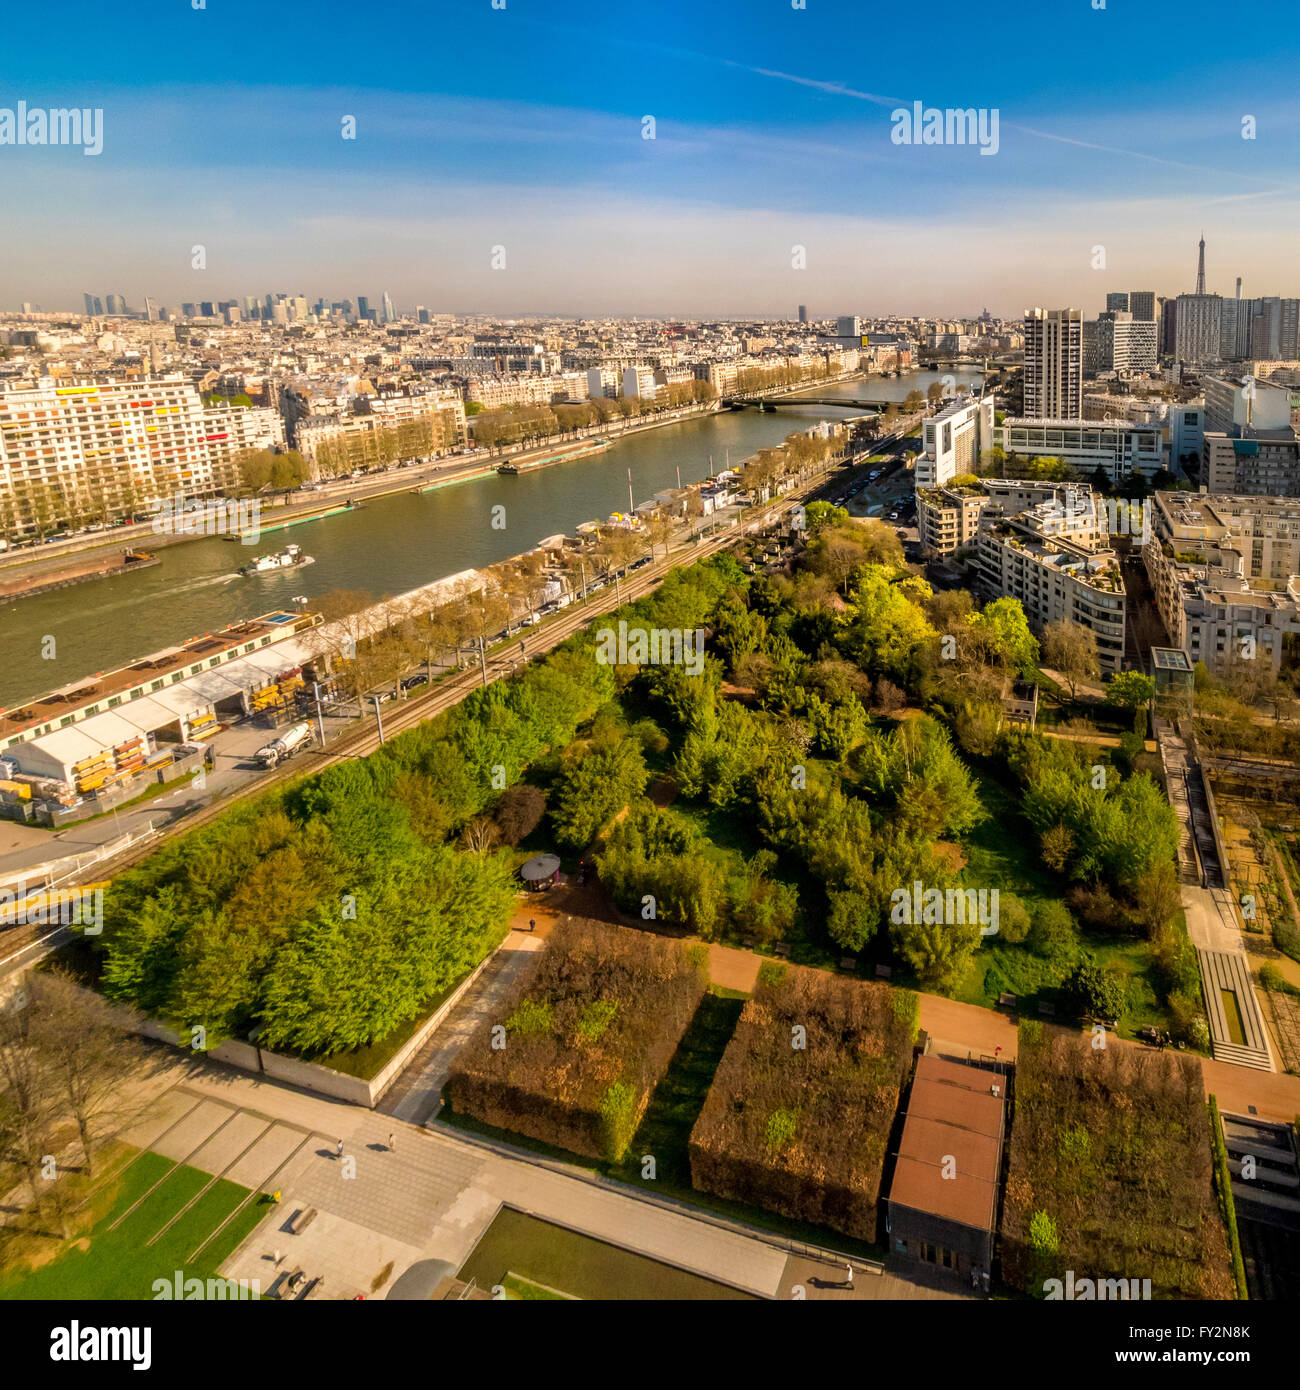 Aerial view of River Seine with Eiffel Tower in distance, Paris, France. Parc André Citroën in foreground. Stock Photo